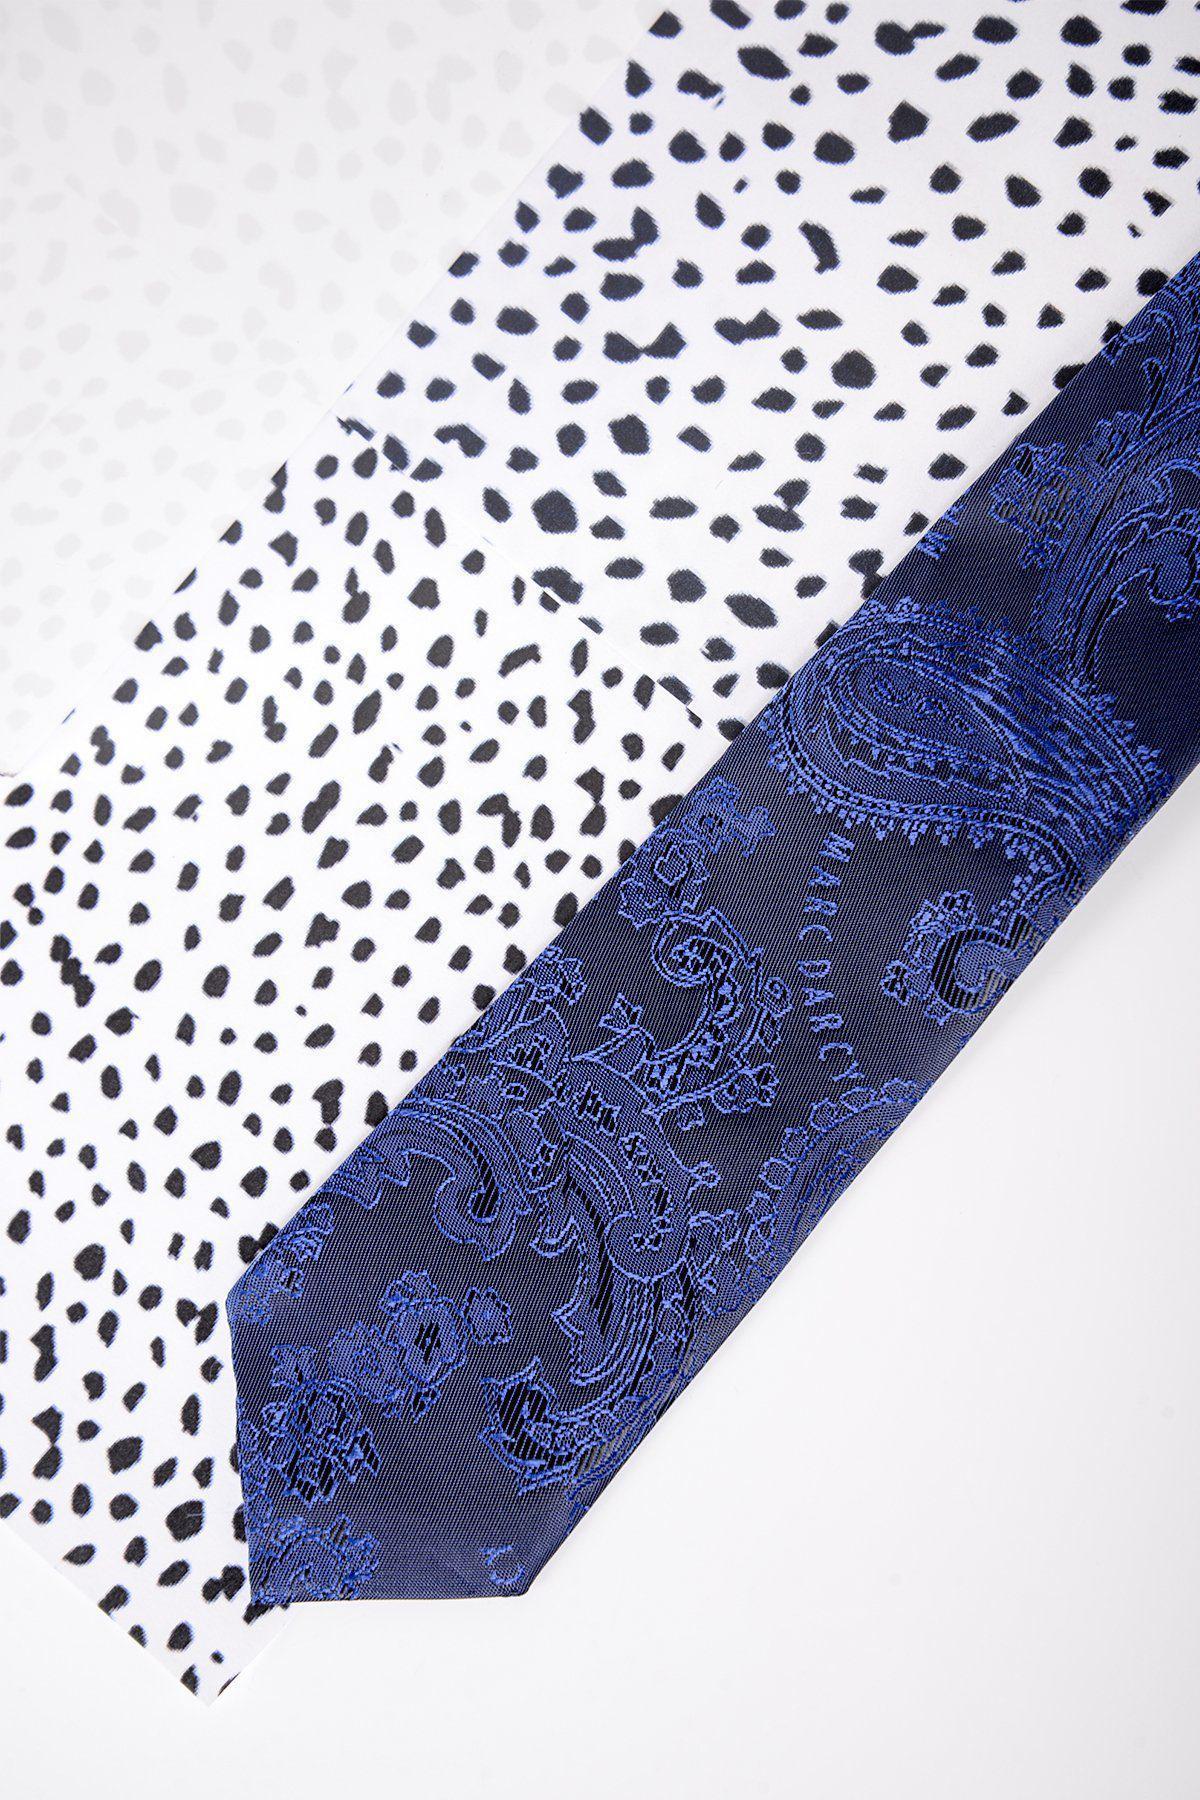 Childrens Navy Paisley Tie-Close up view